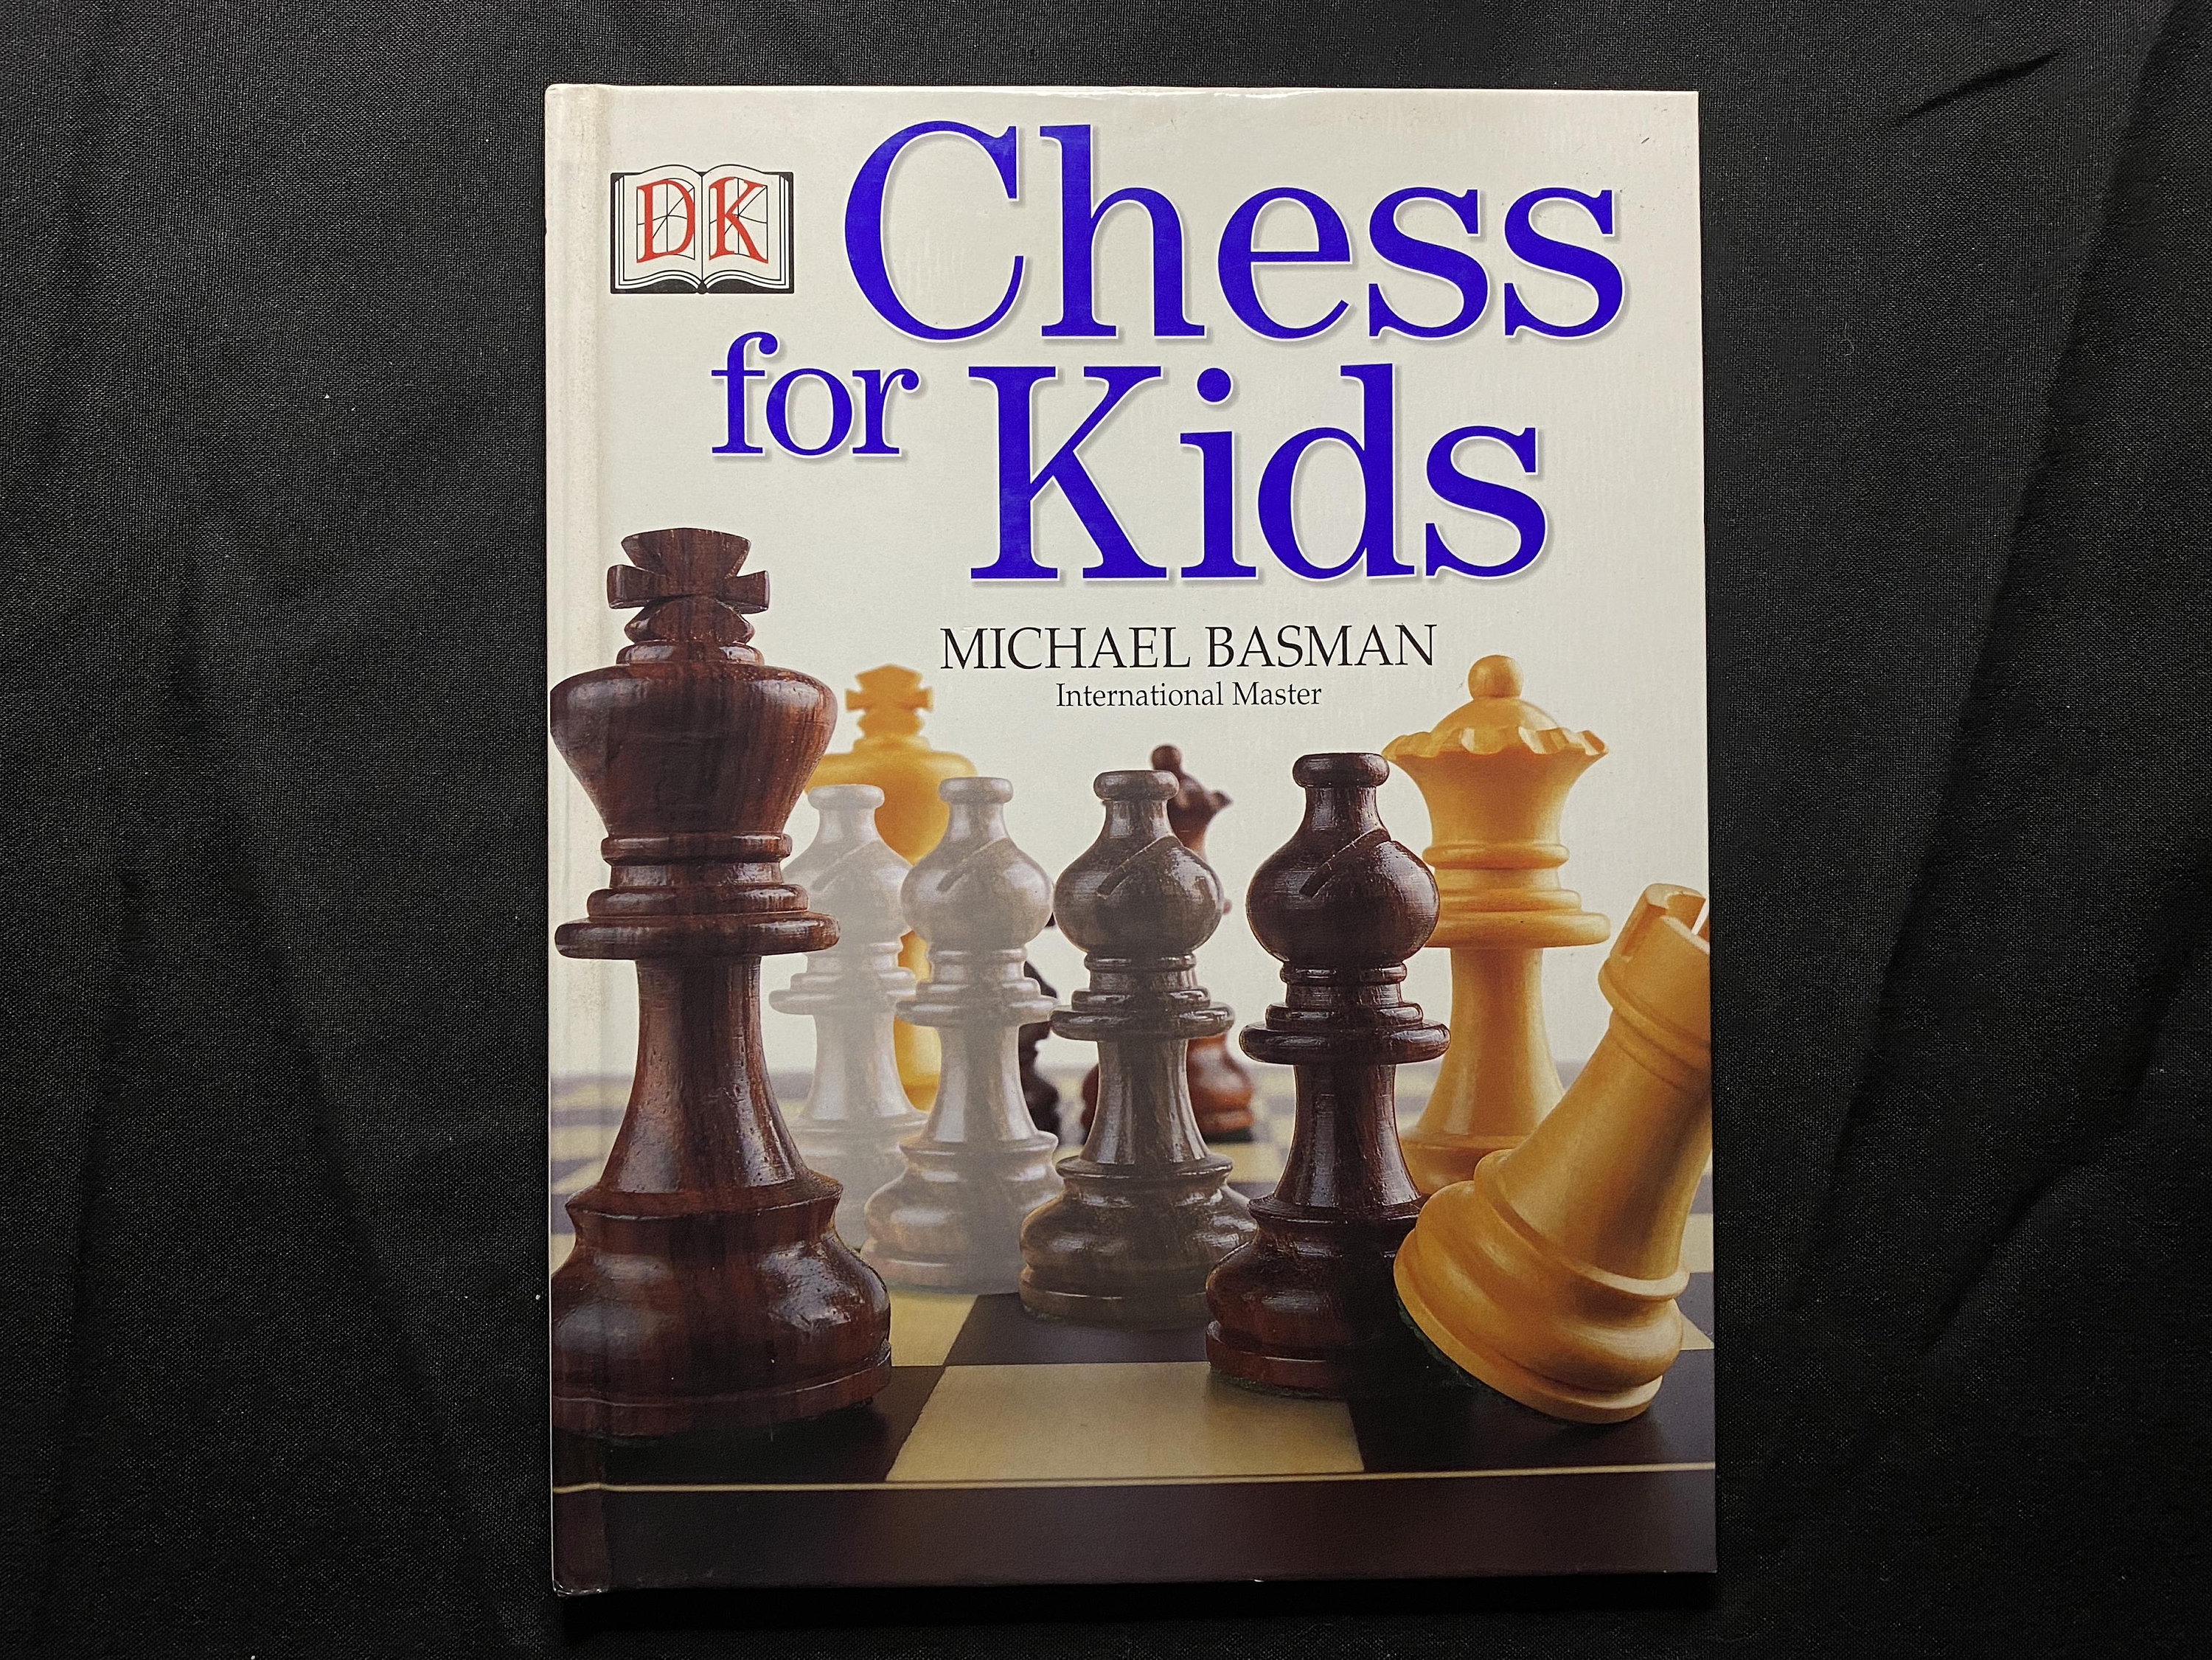 The Best Chess Books for Kids